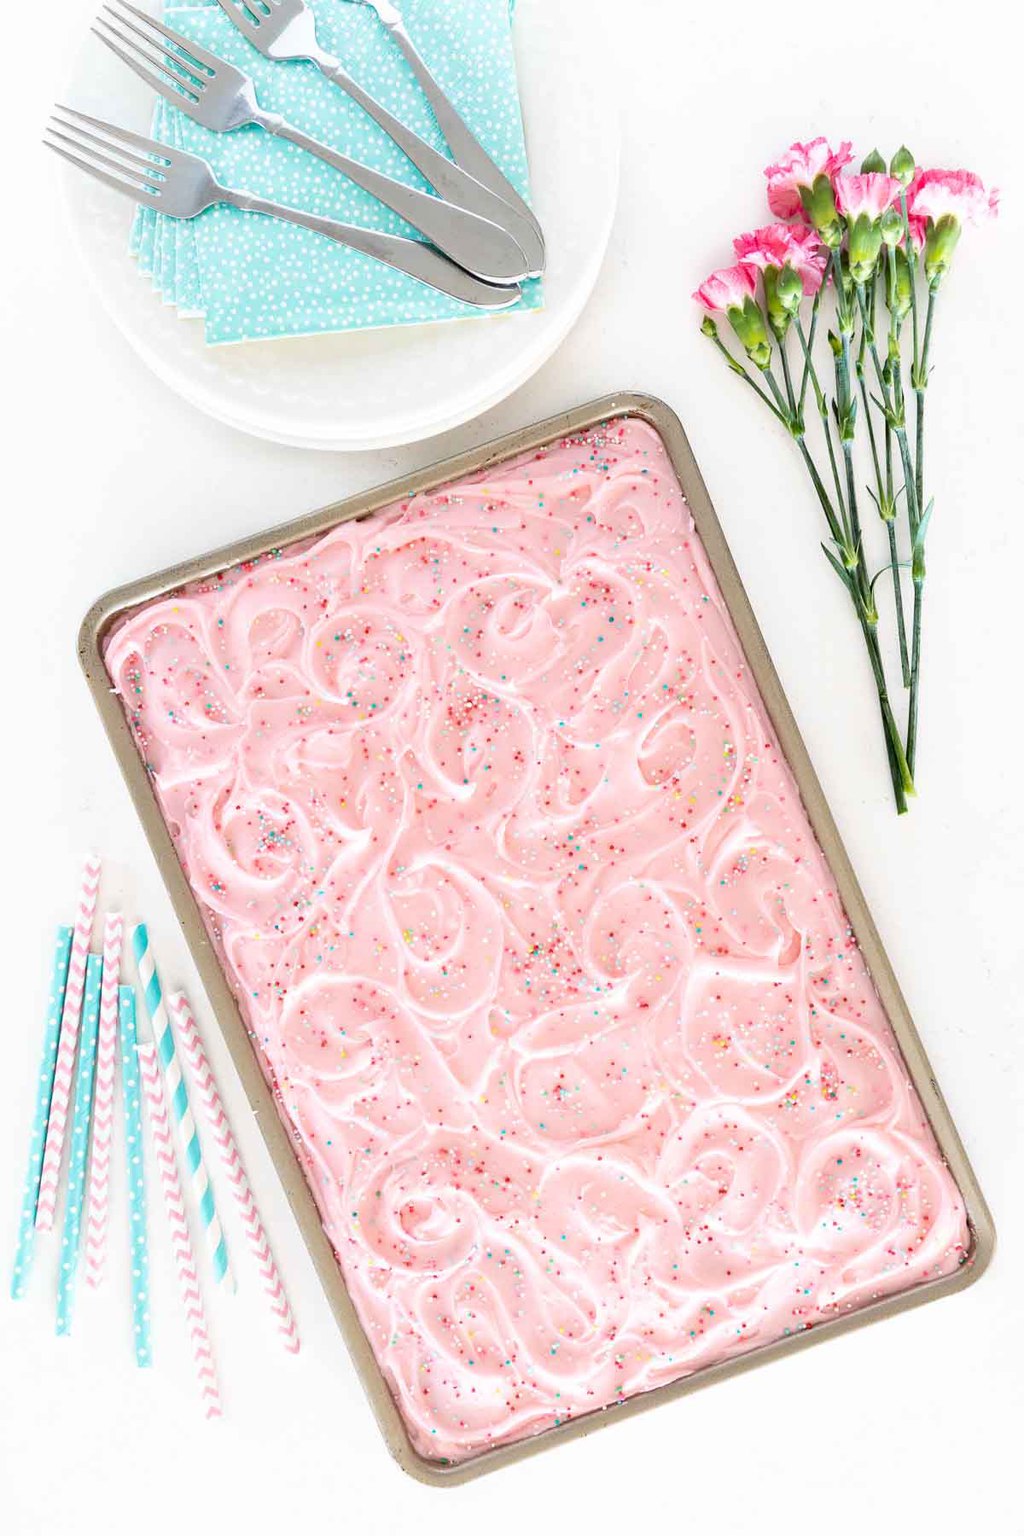 Vertical overhead photo of a Ridiculously Easy Funfetti Sheet Cake on a white countertop.